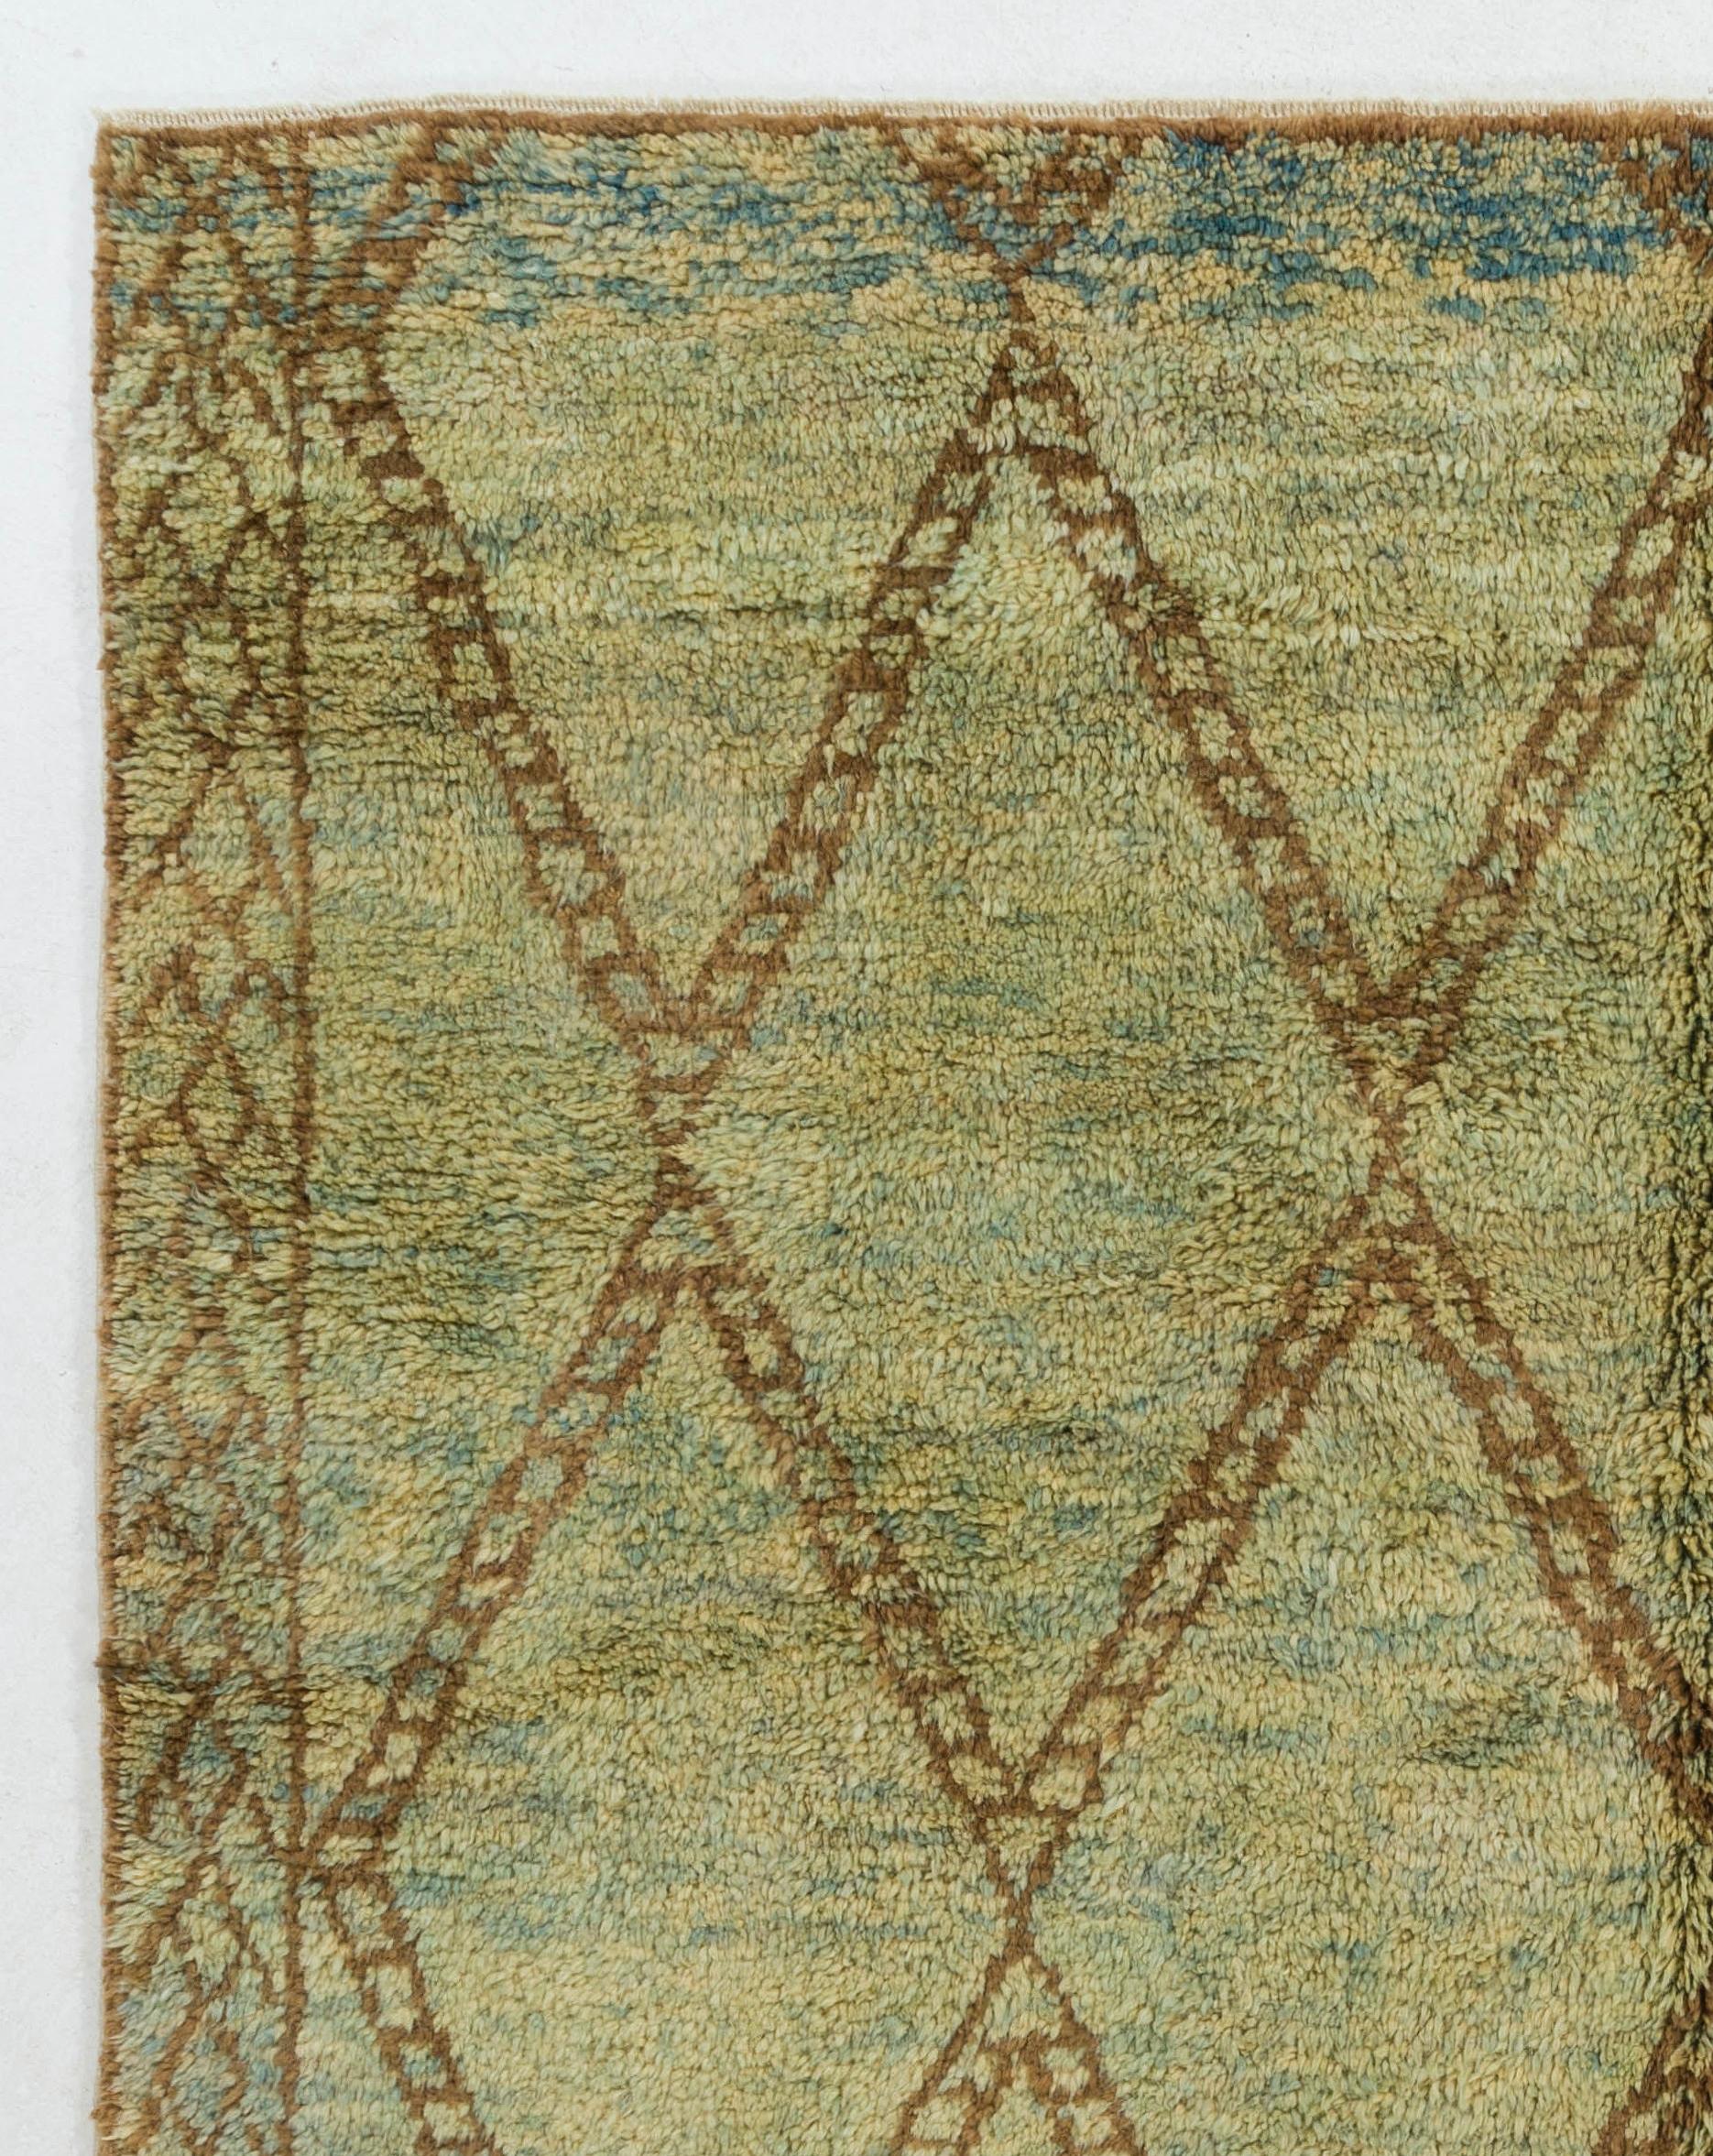 A Moroccan Berber design contemporary hand-knotted rug made of organic wool in a sophisticated, warm and earthy color palette of olive green, brown and light blue. It features an all-over design of lozenge-shaped, wide-edged lattices and two lateral